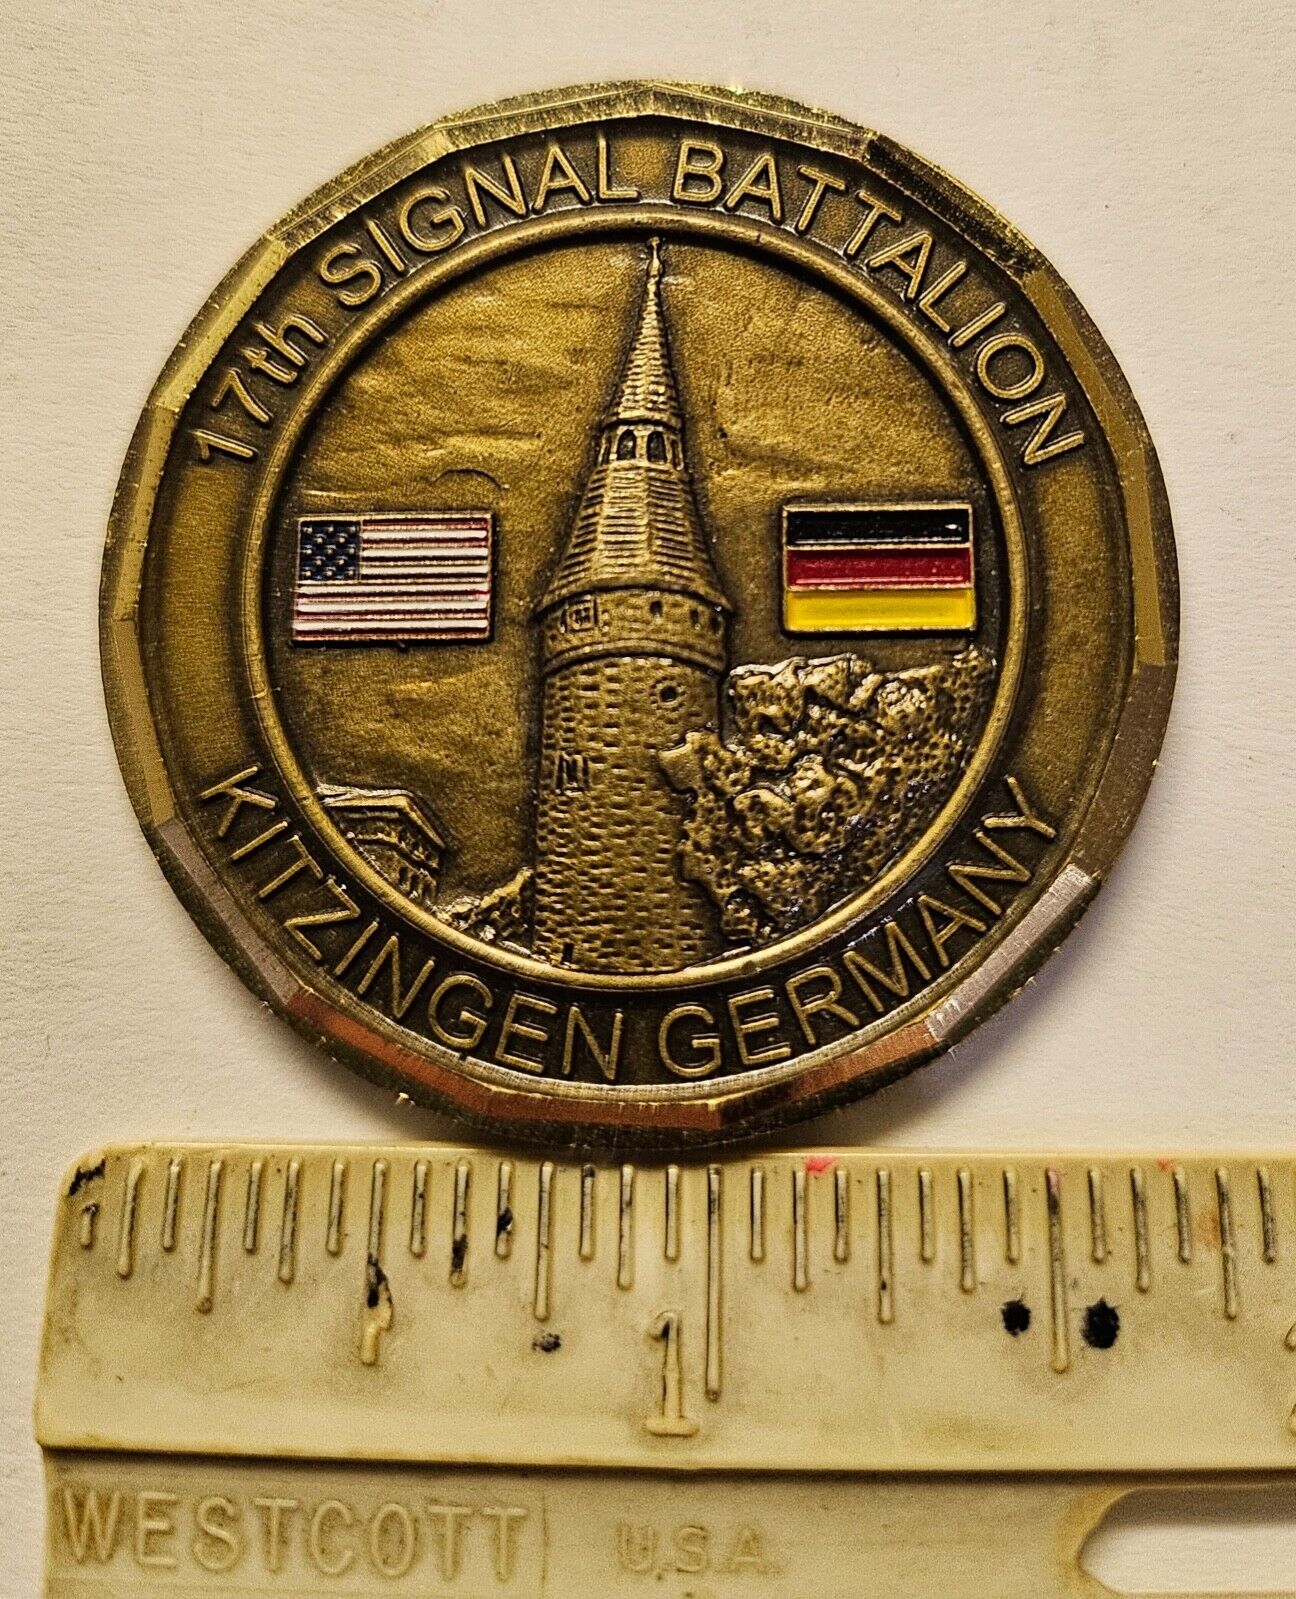 17th Signal Battalion, Kitzingen, Germany Military Challenge Coin